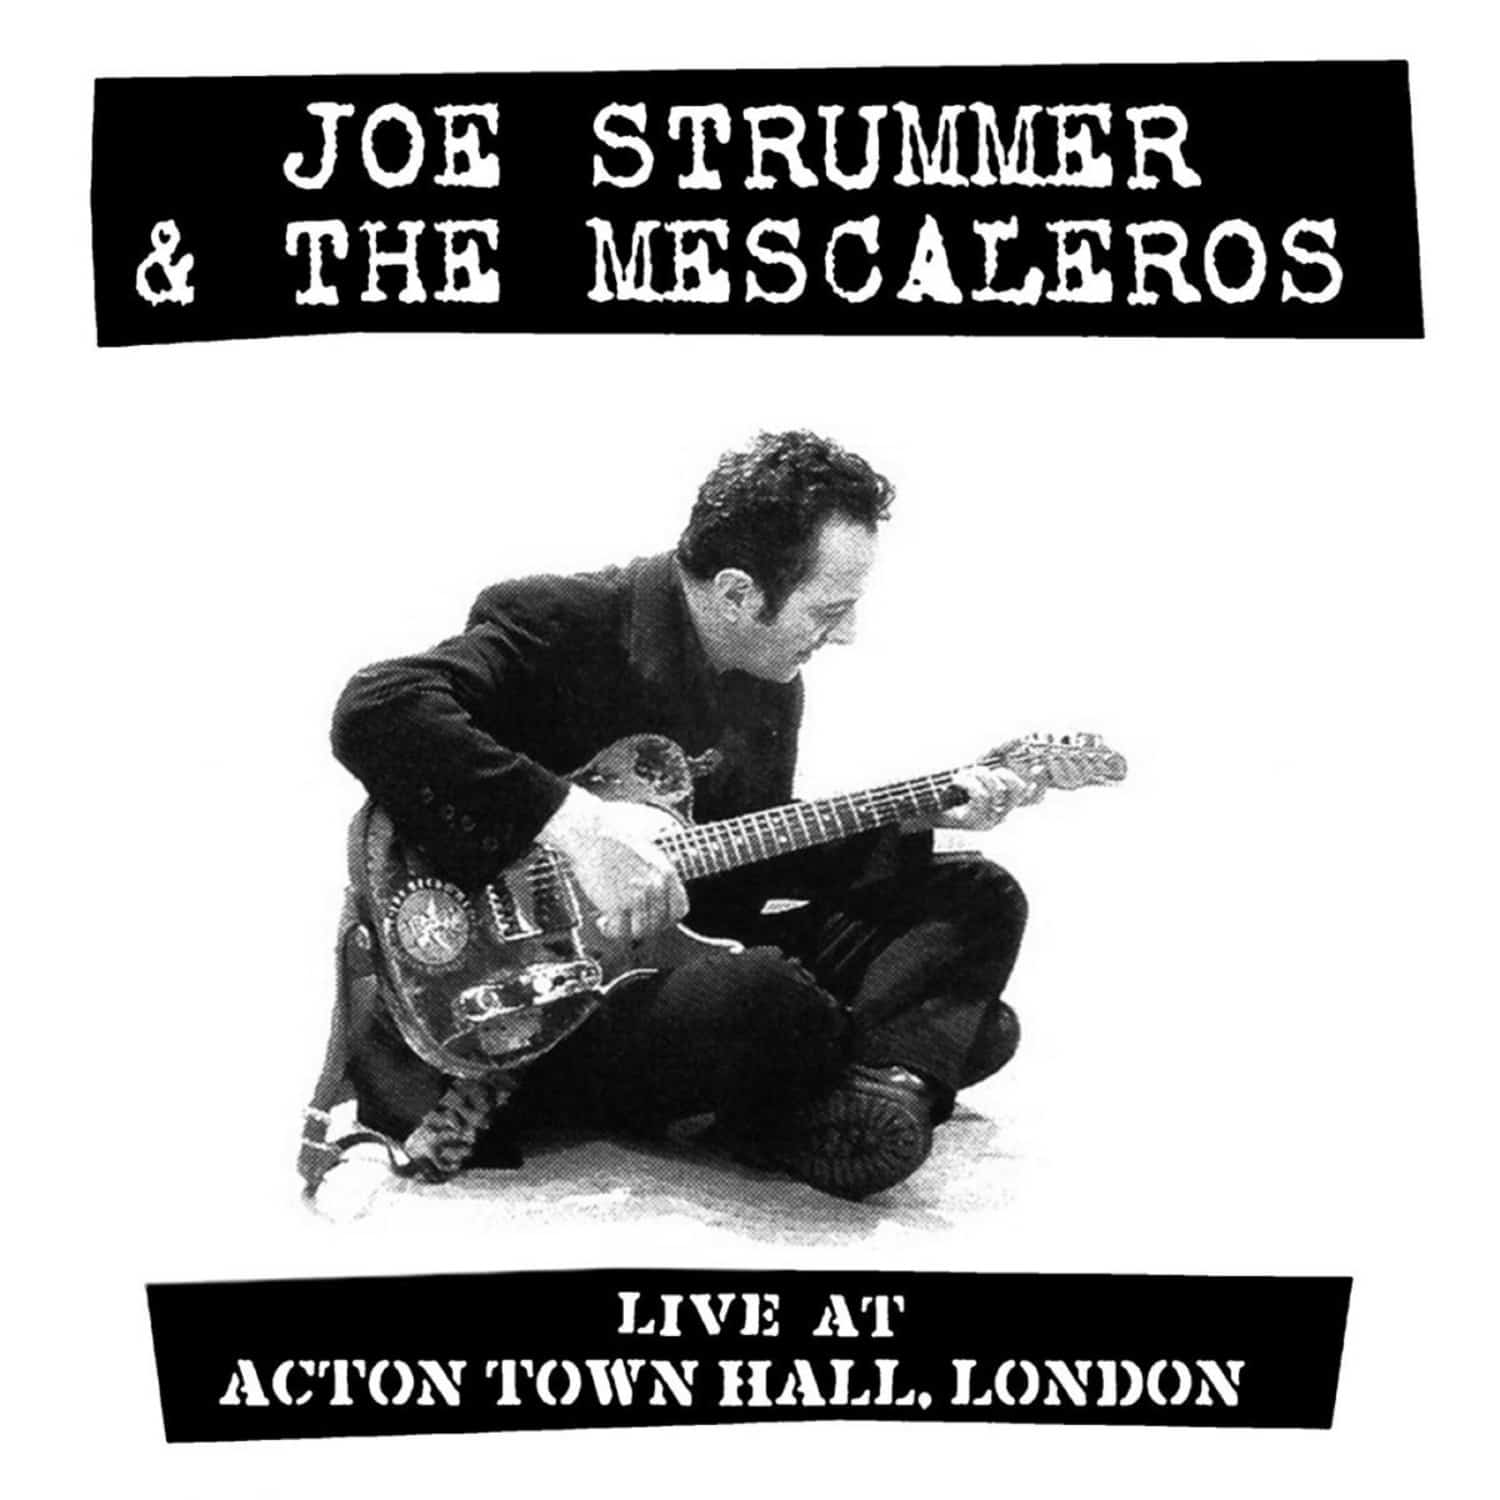 Joe Strummer &The Mescaleros - LIVE AT ACTON TOWN HALL 